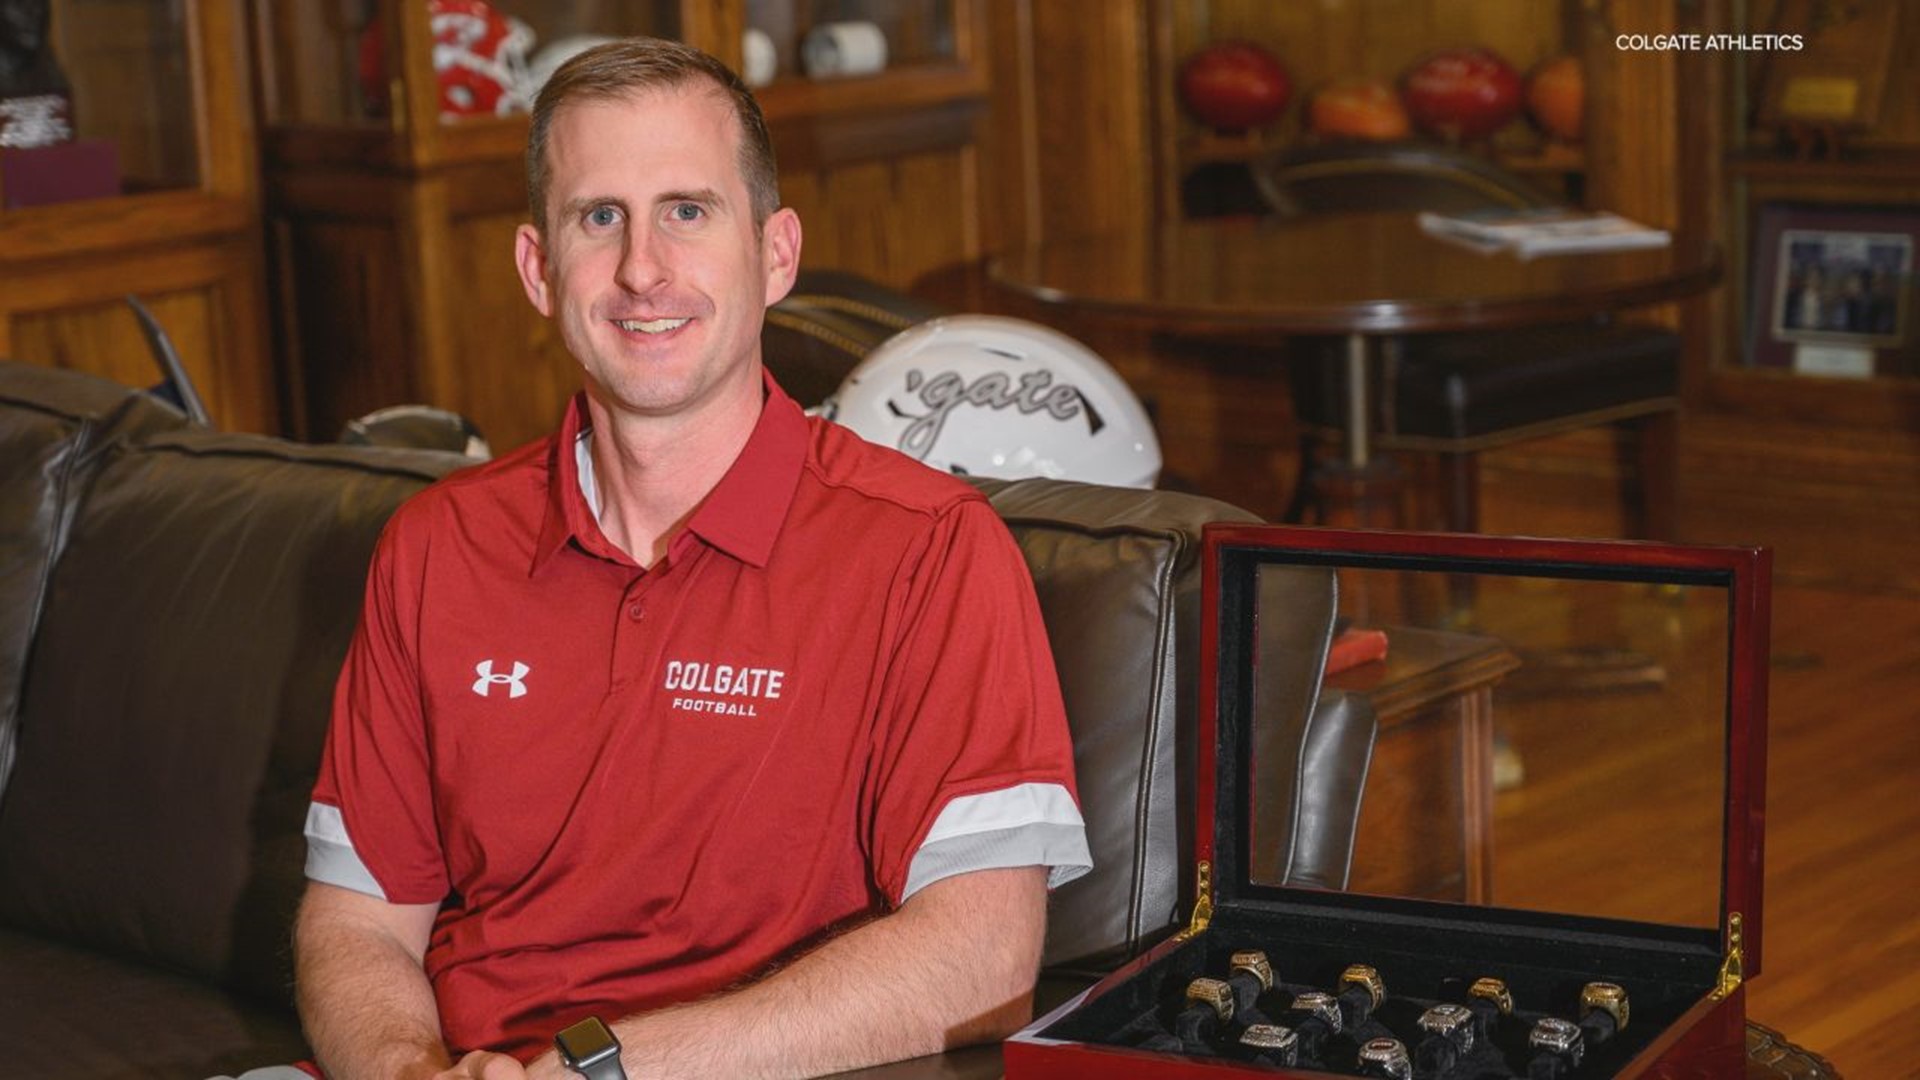 From the Coal Region to Colgate, Dakosty Following in Father's Footsteps as a Head Coach